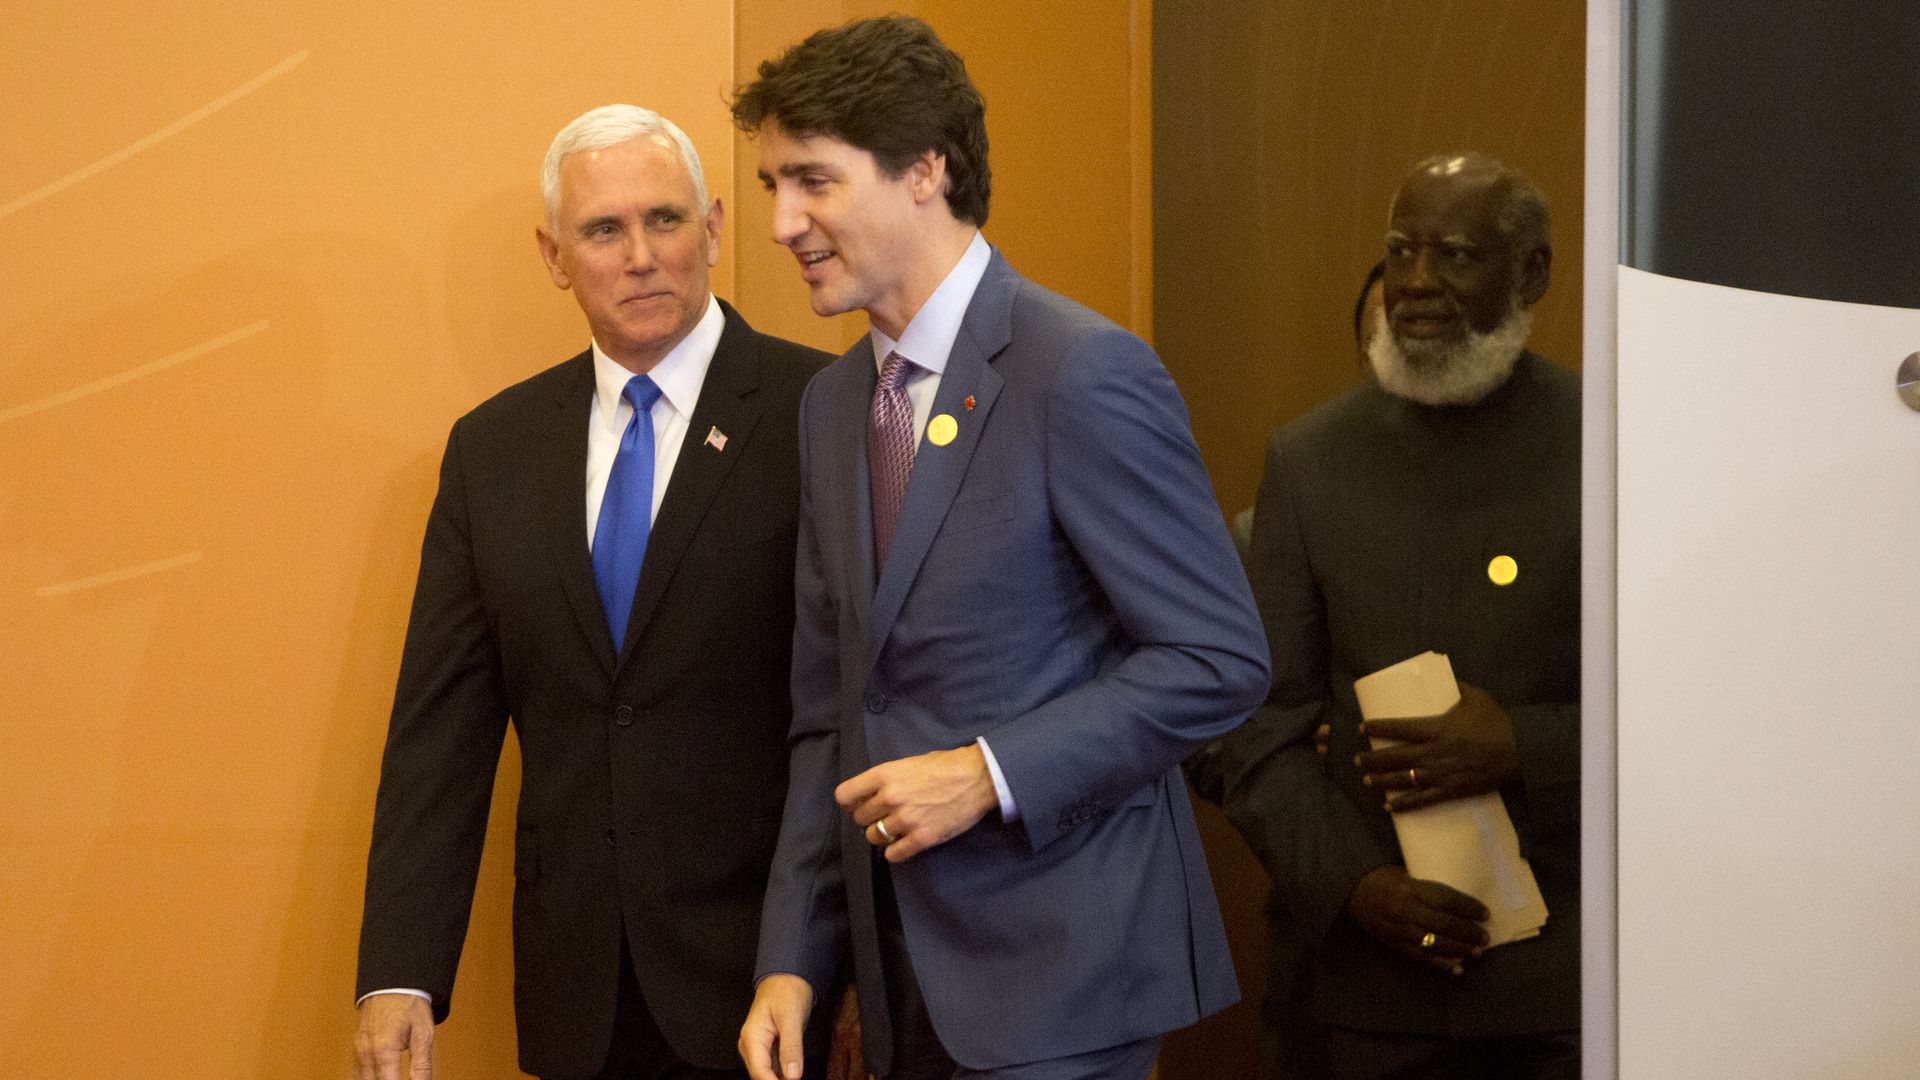   US Vice President Mike Pence and talks with President of Canada Justin Trudeau in 2018.